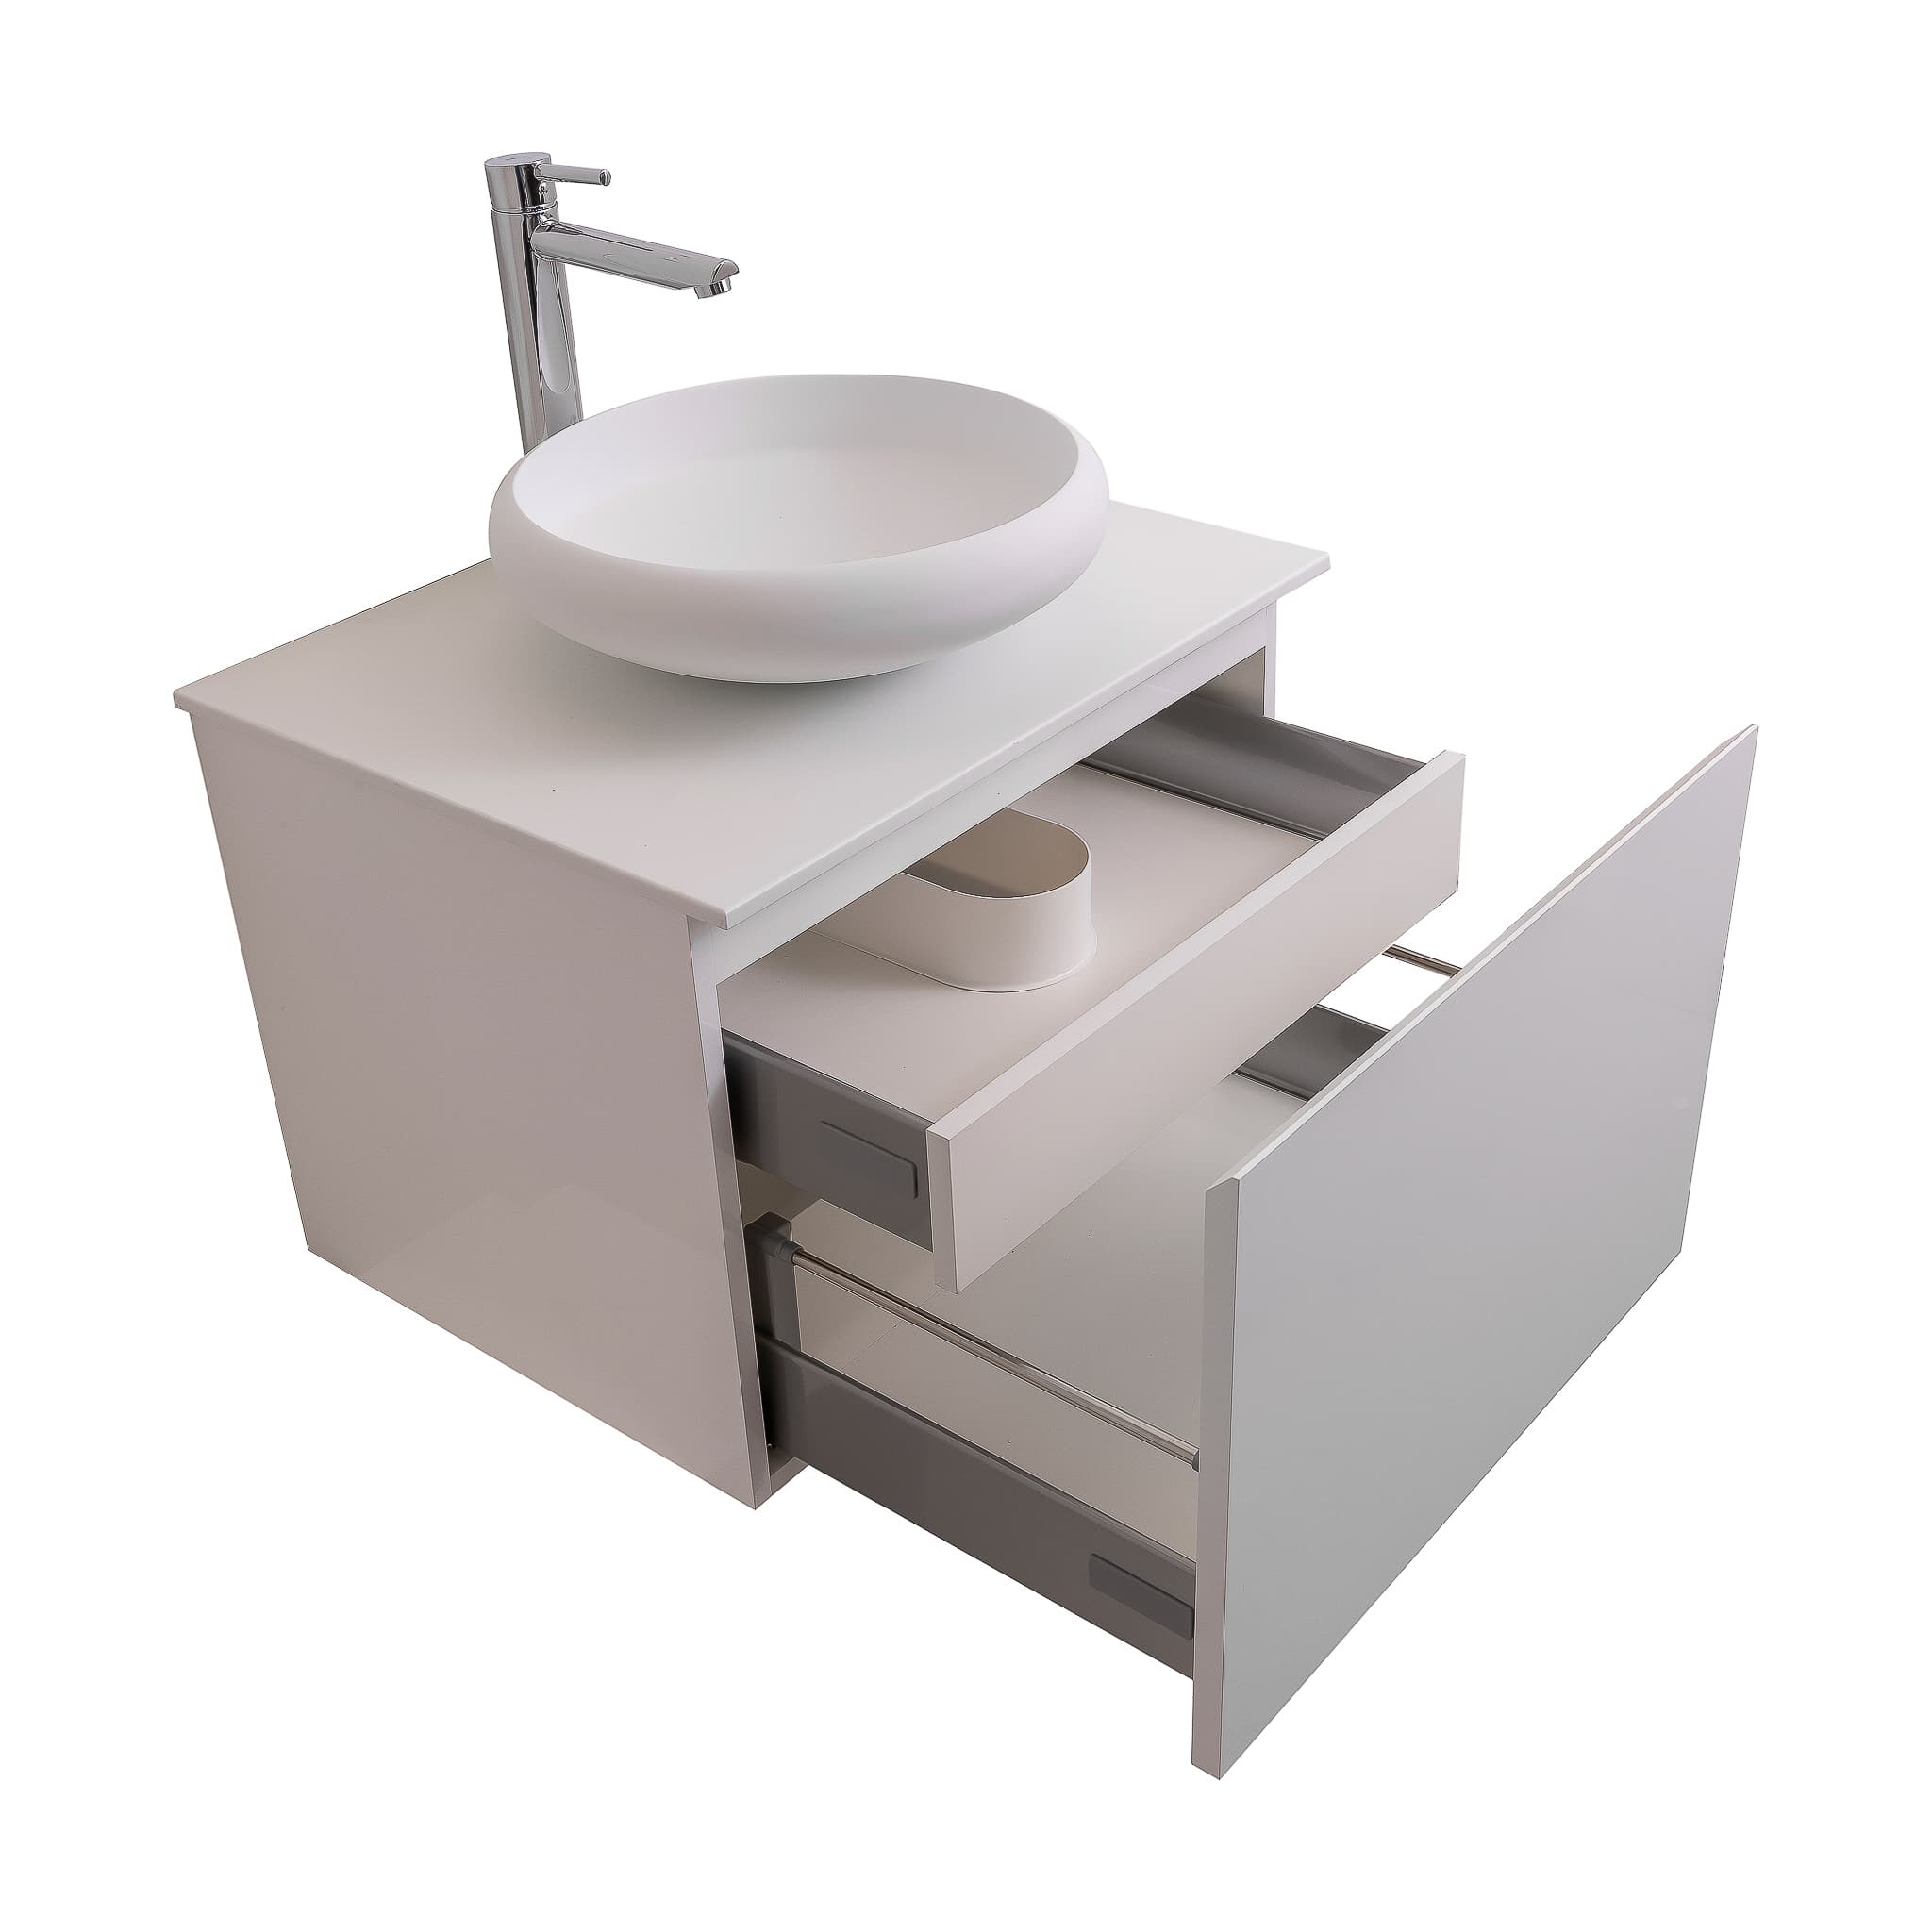 Venice 23.5 White High Gloss Cabinet, Solid Surface Flat White Counter And Round Solid Surface White Basin 1153, Wall Mounted Modern Vanity Set